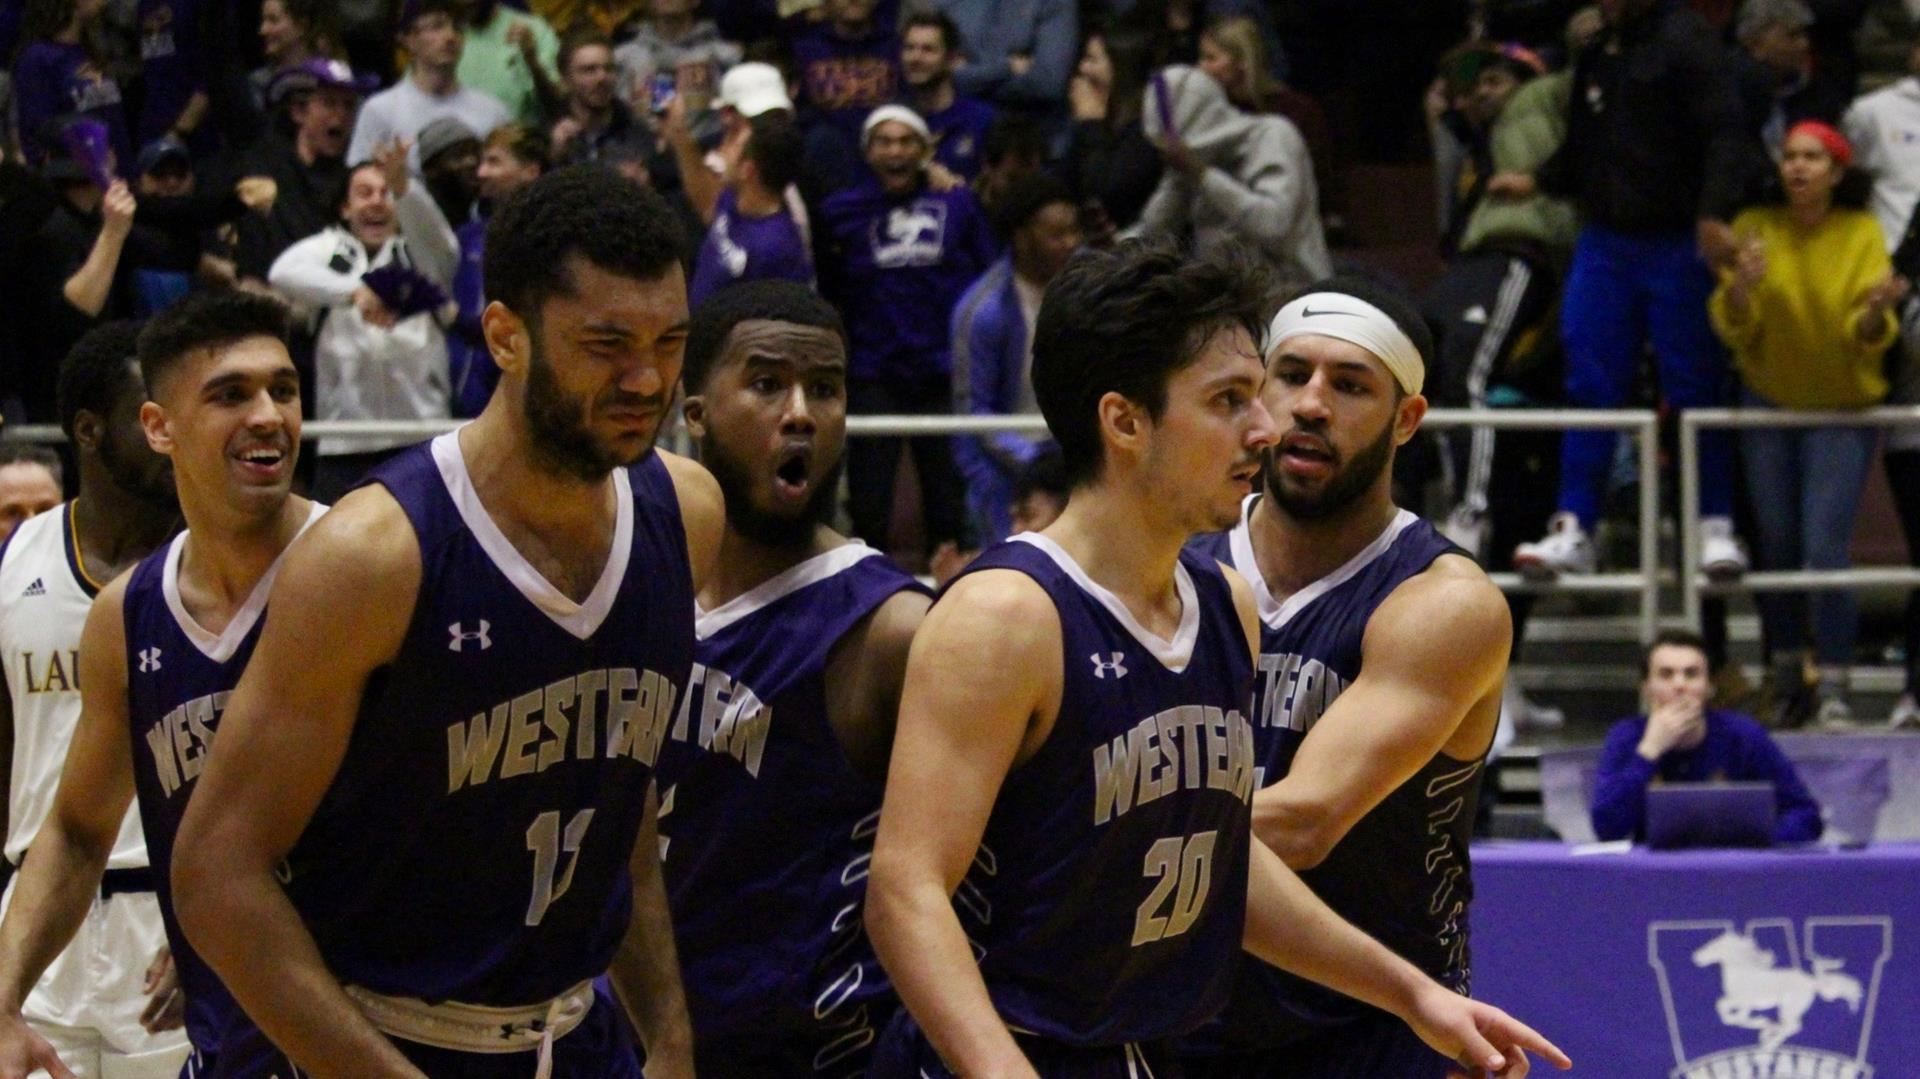 western mustangs return to u sports final 8 with dramatic 104 103 overtime win over laurier golden hawks